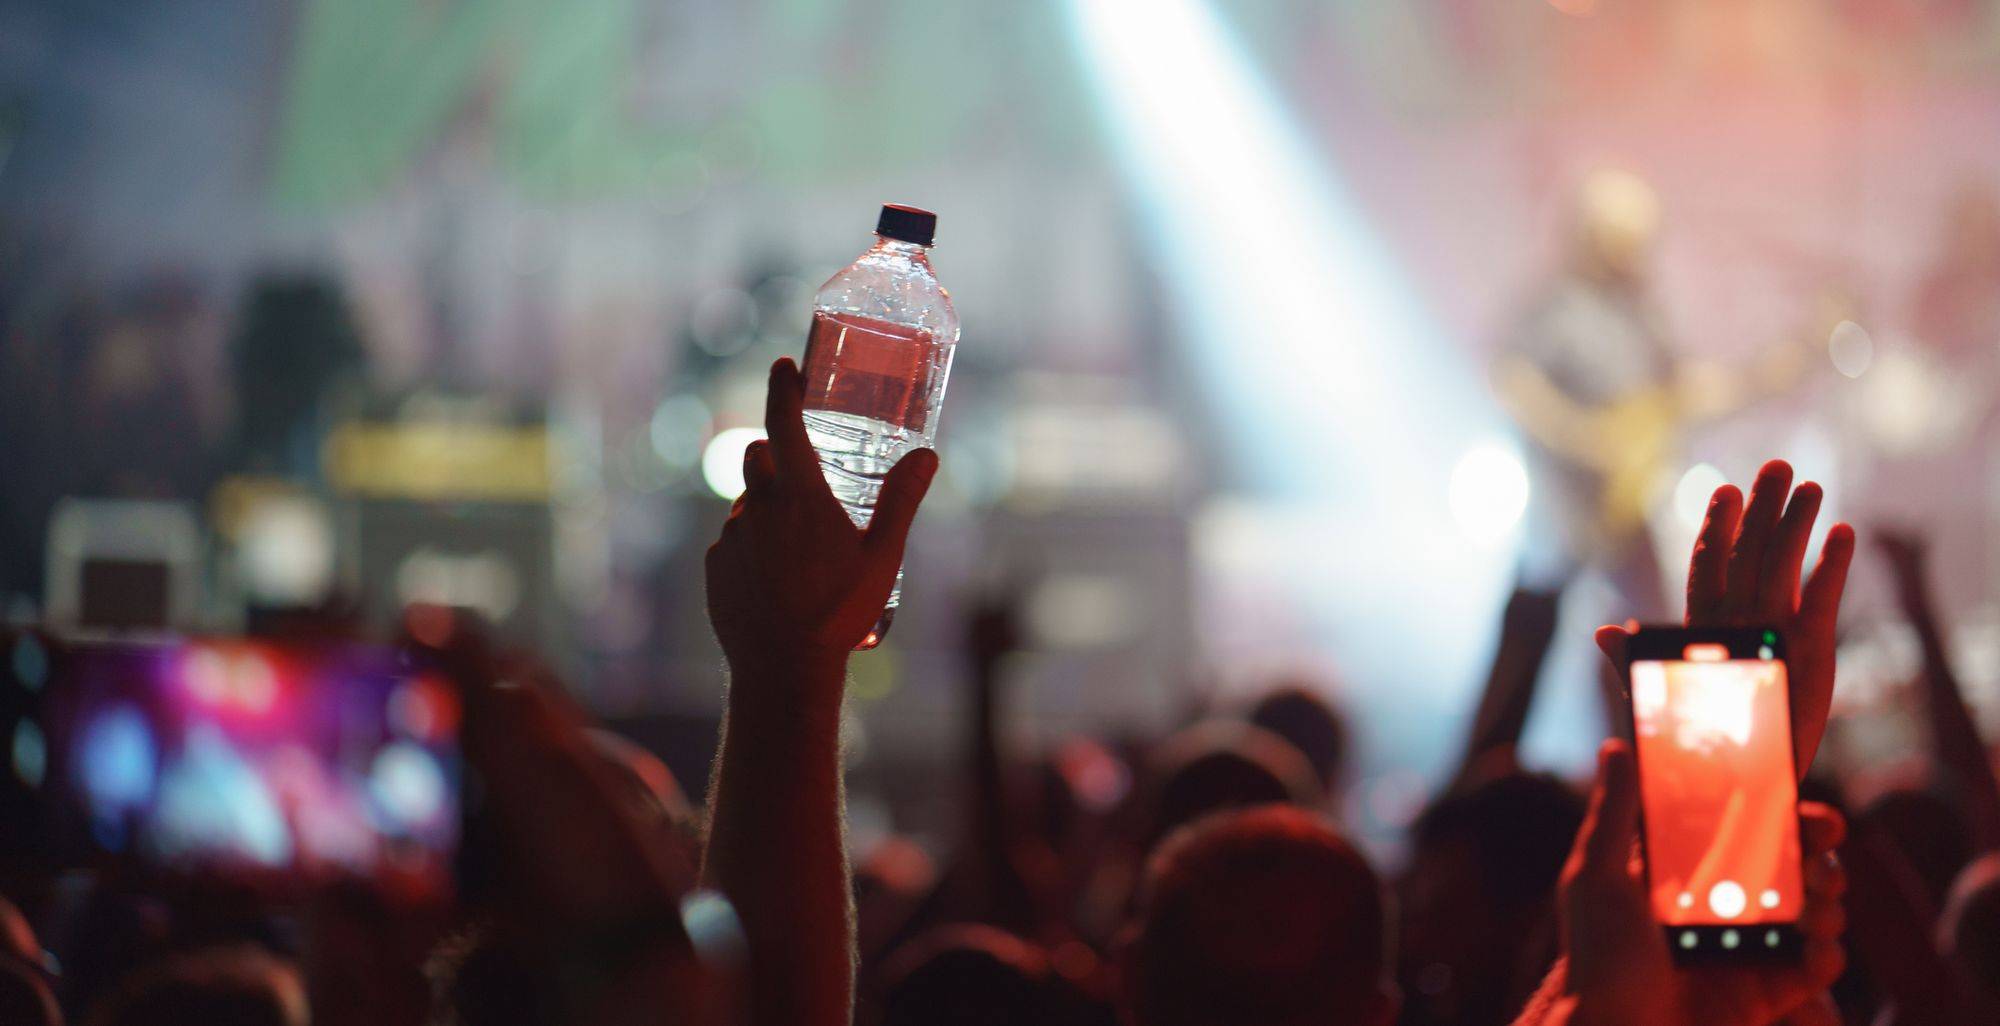 A close up of a hand holding up a water bottle in a busy crowd at a concert.